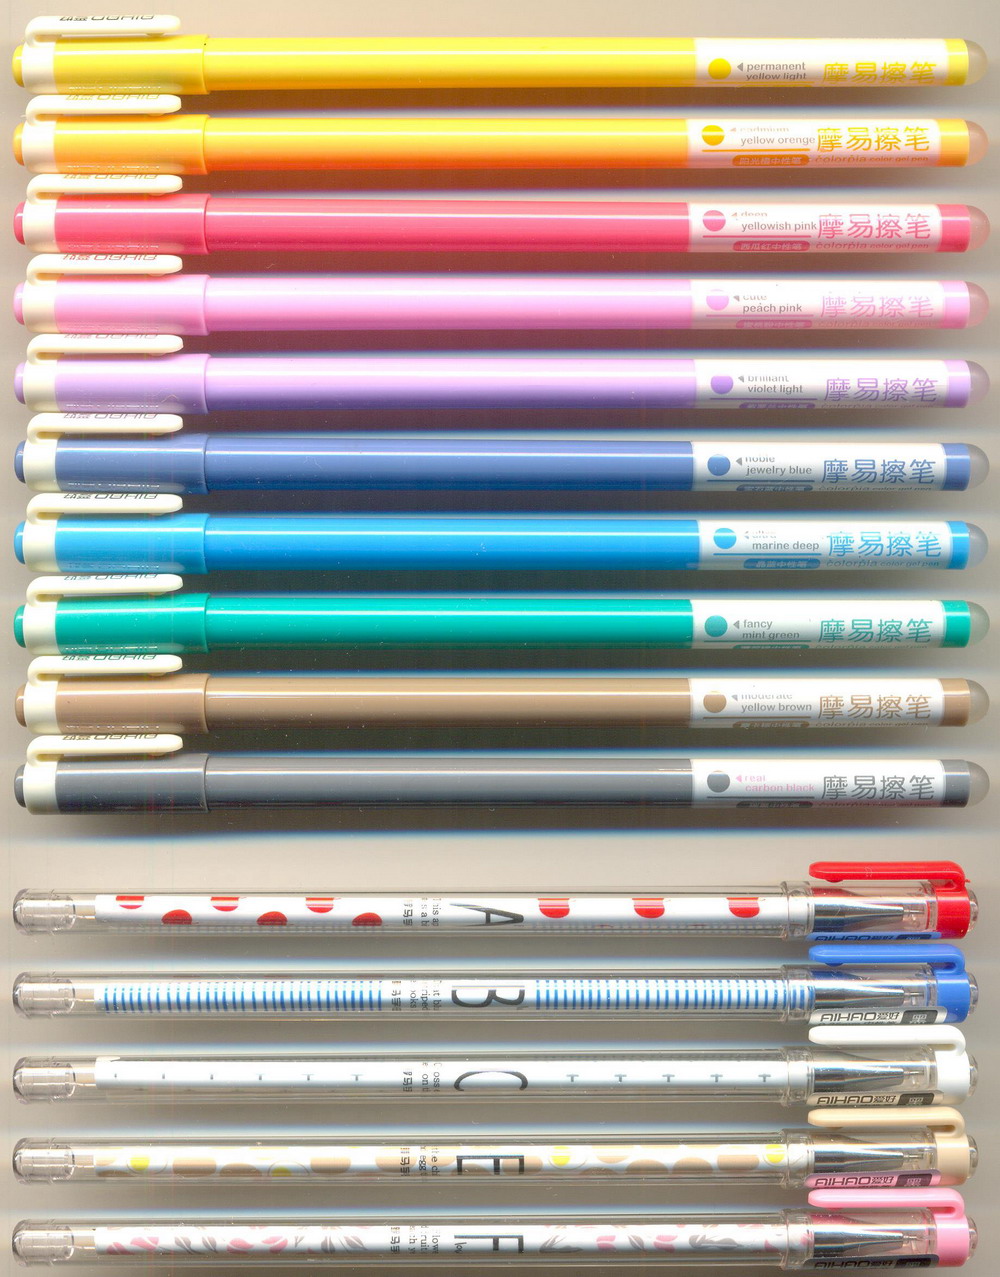 AIHAO colorpa 4651 0.5mm / 41603 0.35mm